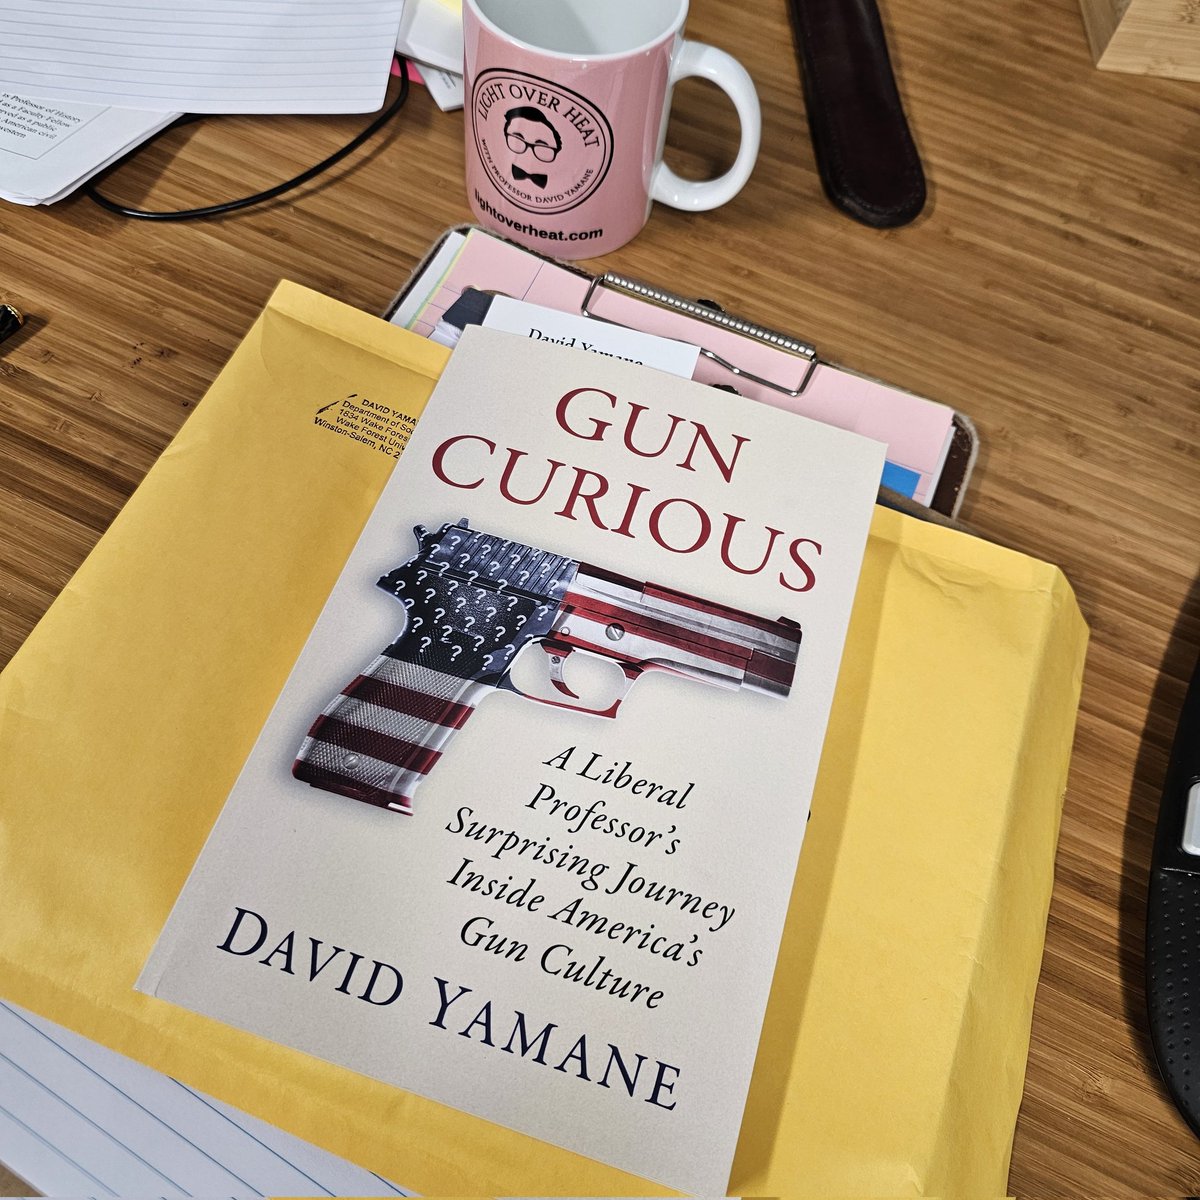 Mostly send out digital advance review copies these days, but some people are like me and can't read long form text electronically. So some printed ARCs do go out.

#books #bookreviews #writerslife #writer #publishing #guns #gunsafety #guncurious #2A #gunculture #soctwitter